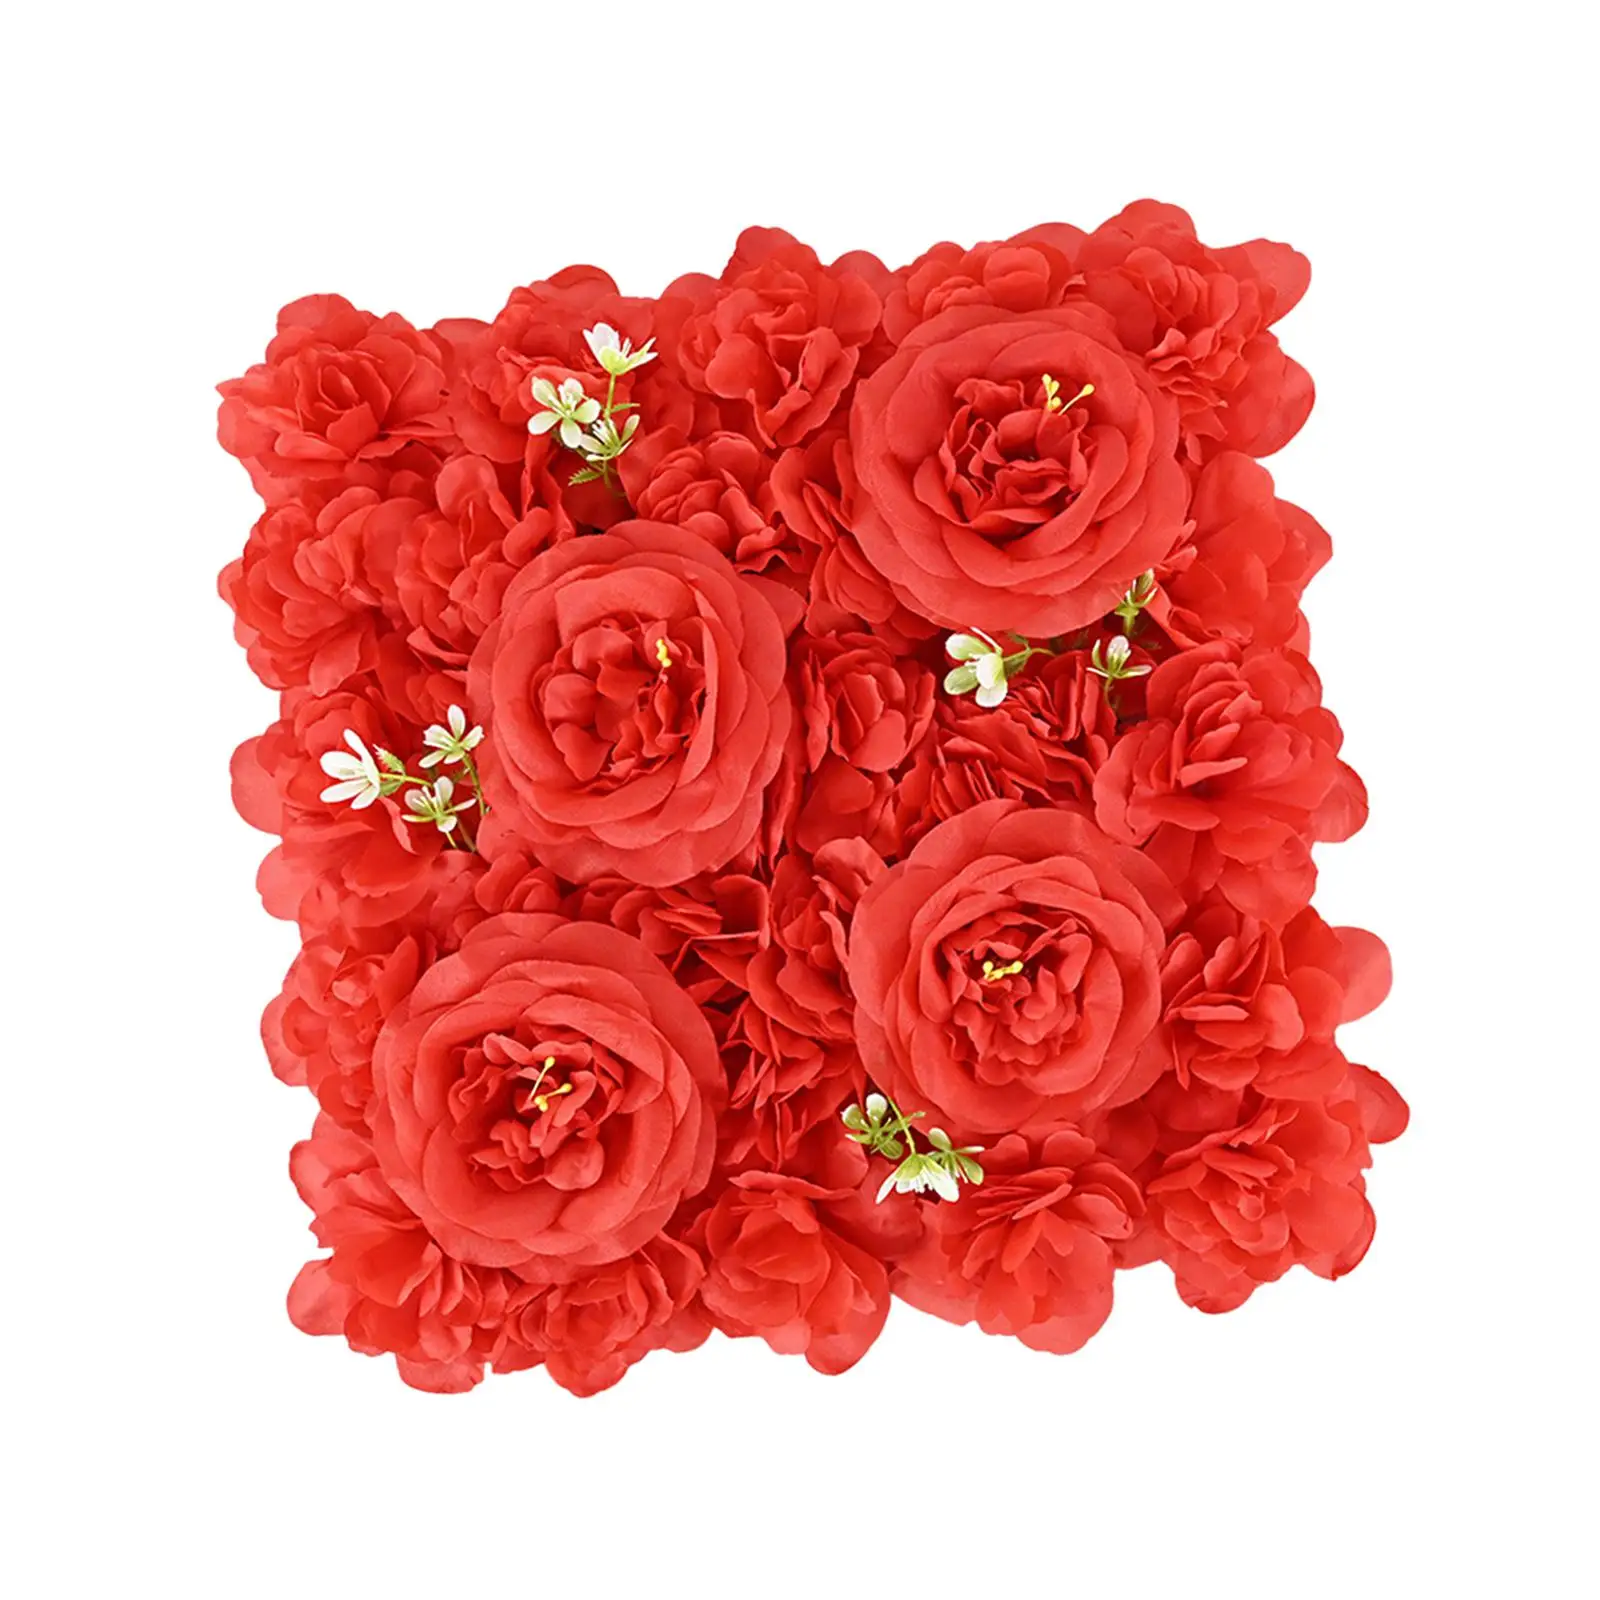 Artificial Flower Wall Panel Floral Photo Background for Wedding Event Home